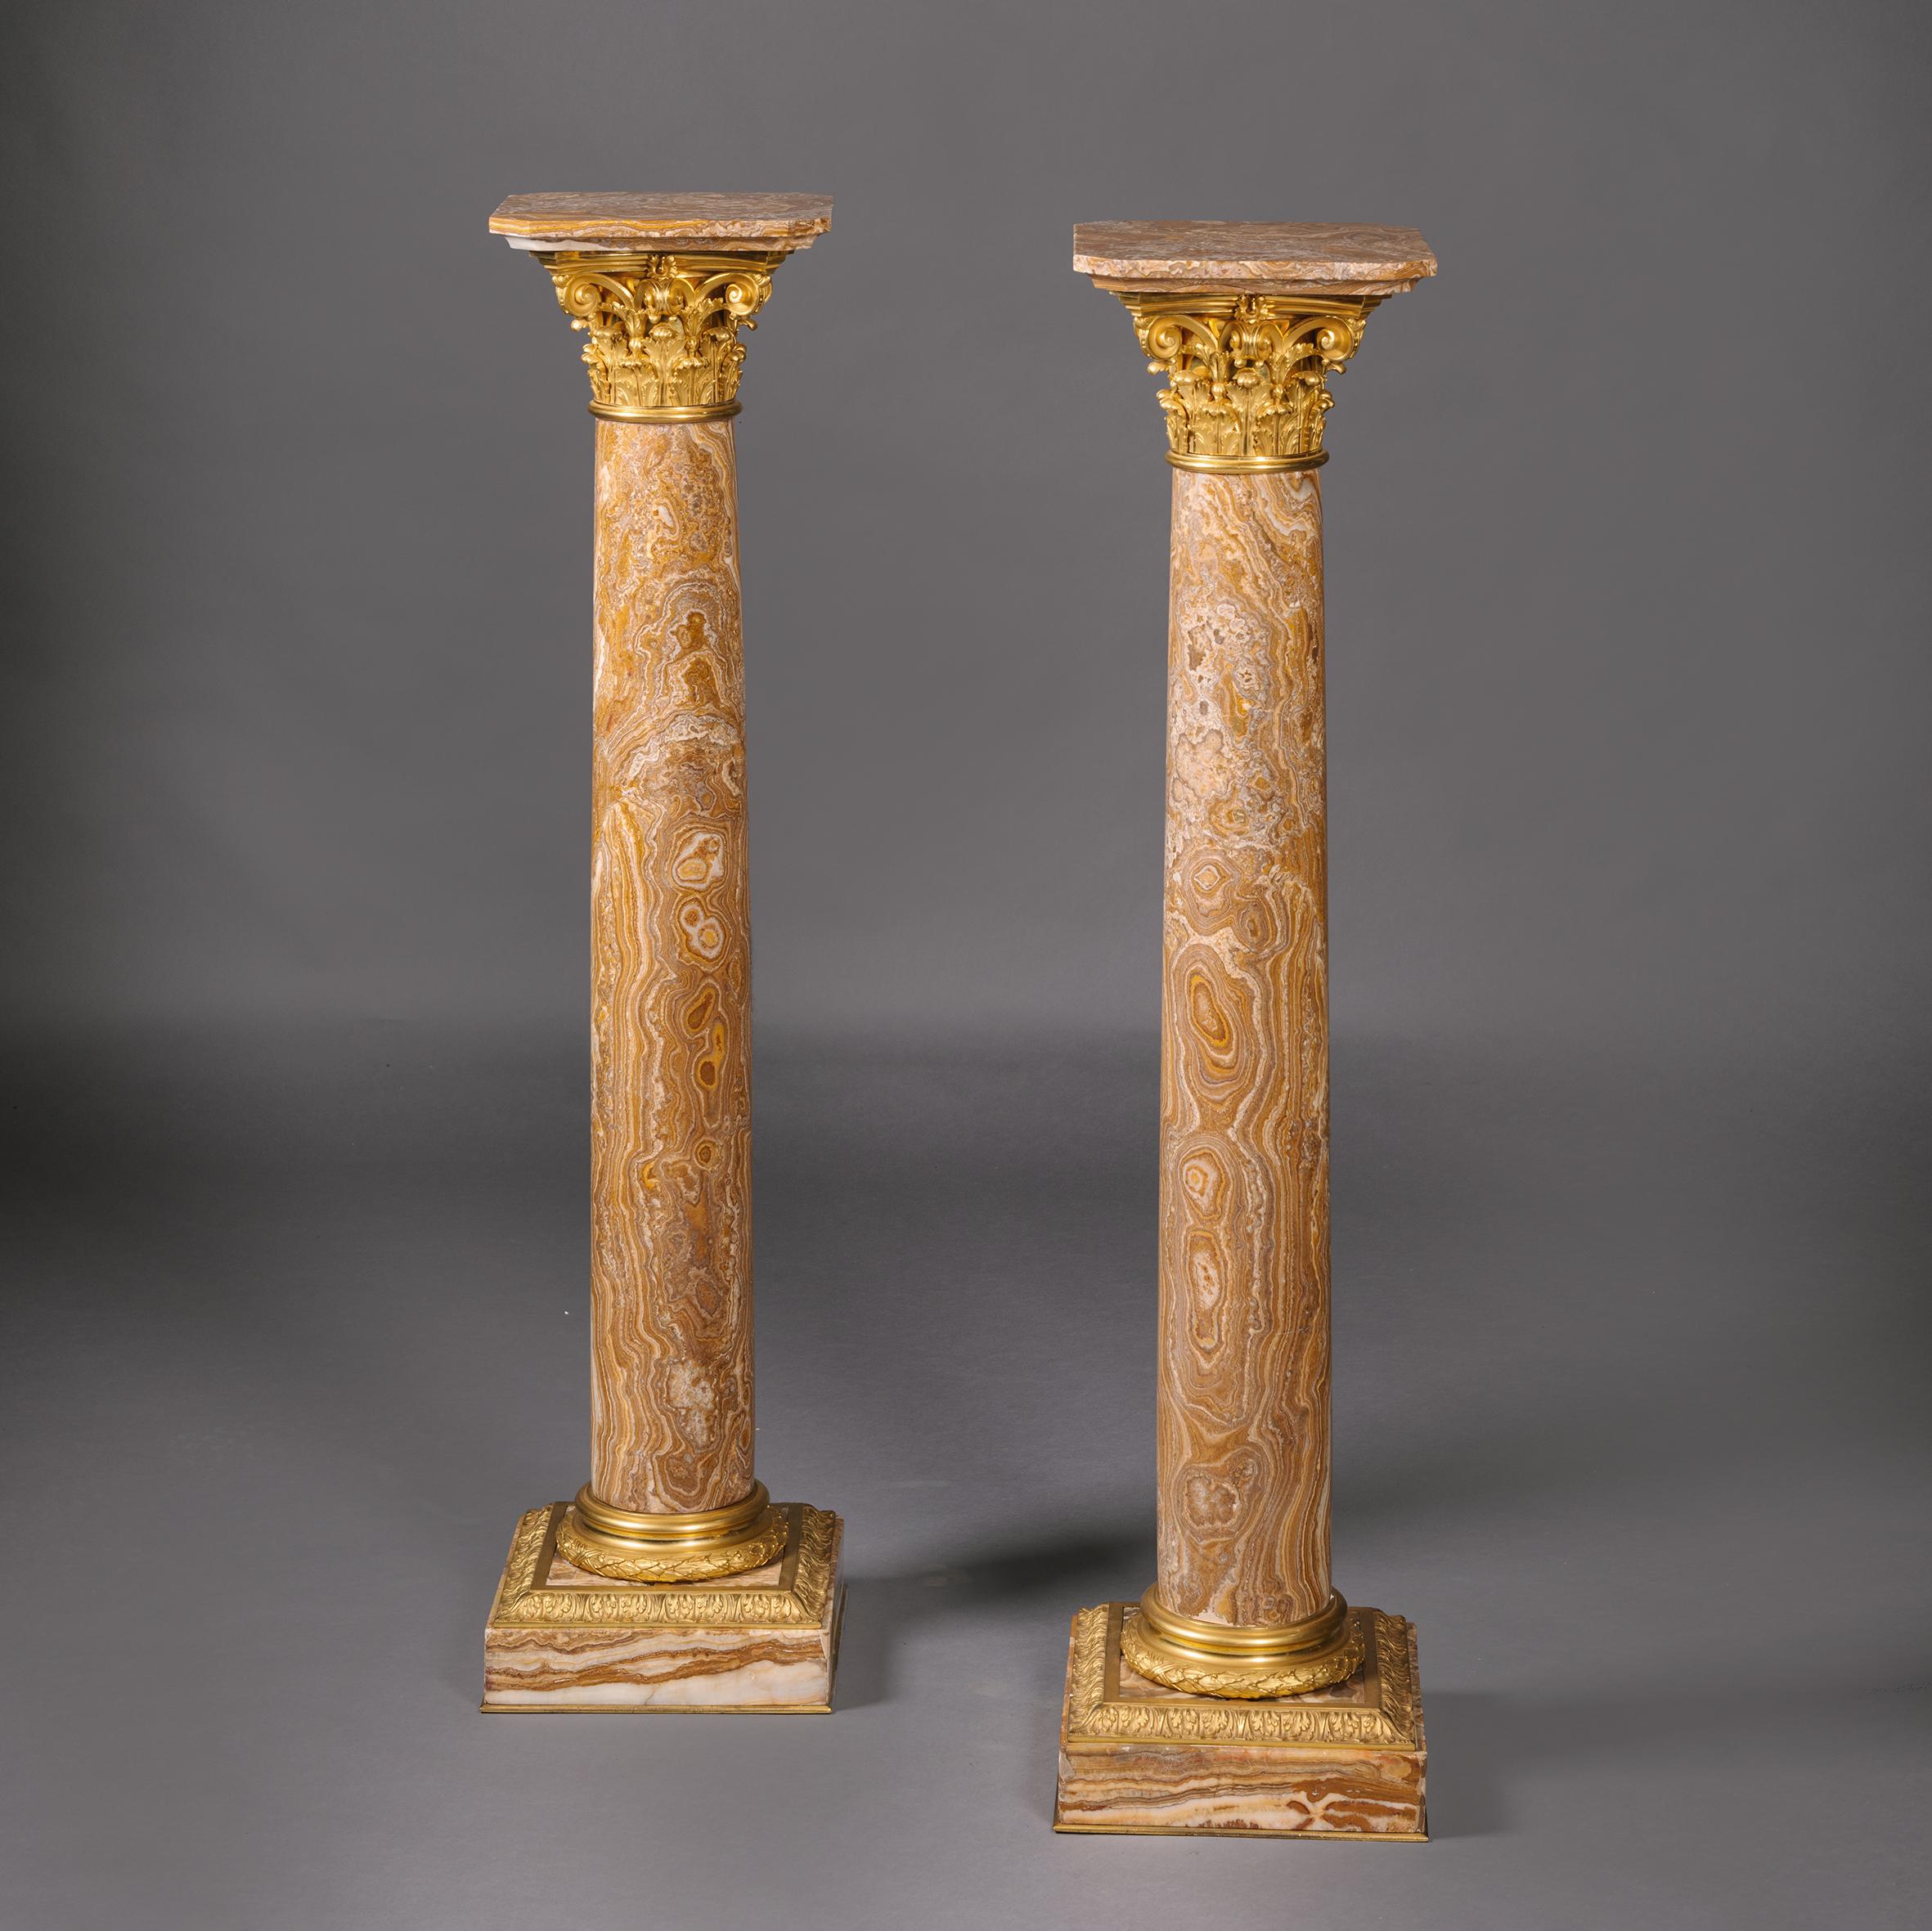 Pair of Louis XVI Style Gilt-Bronze Mounted Pedestals In Good Condition For Sale In Brighton, West Sussex